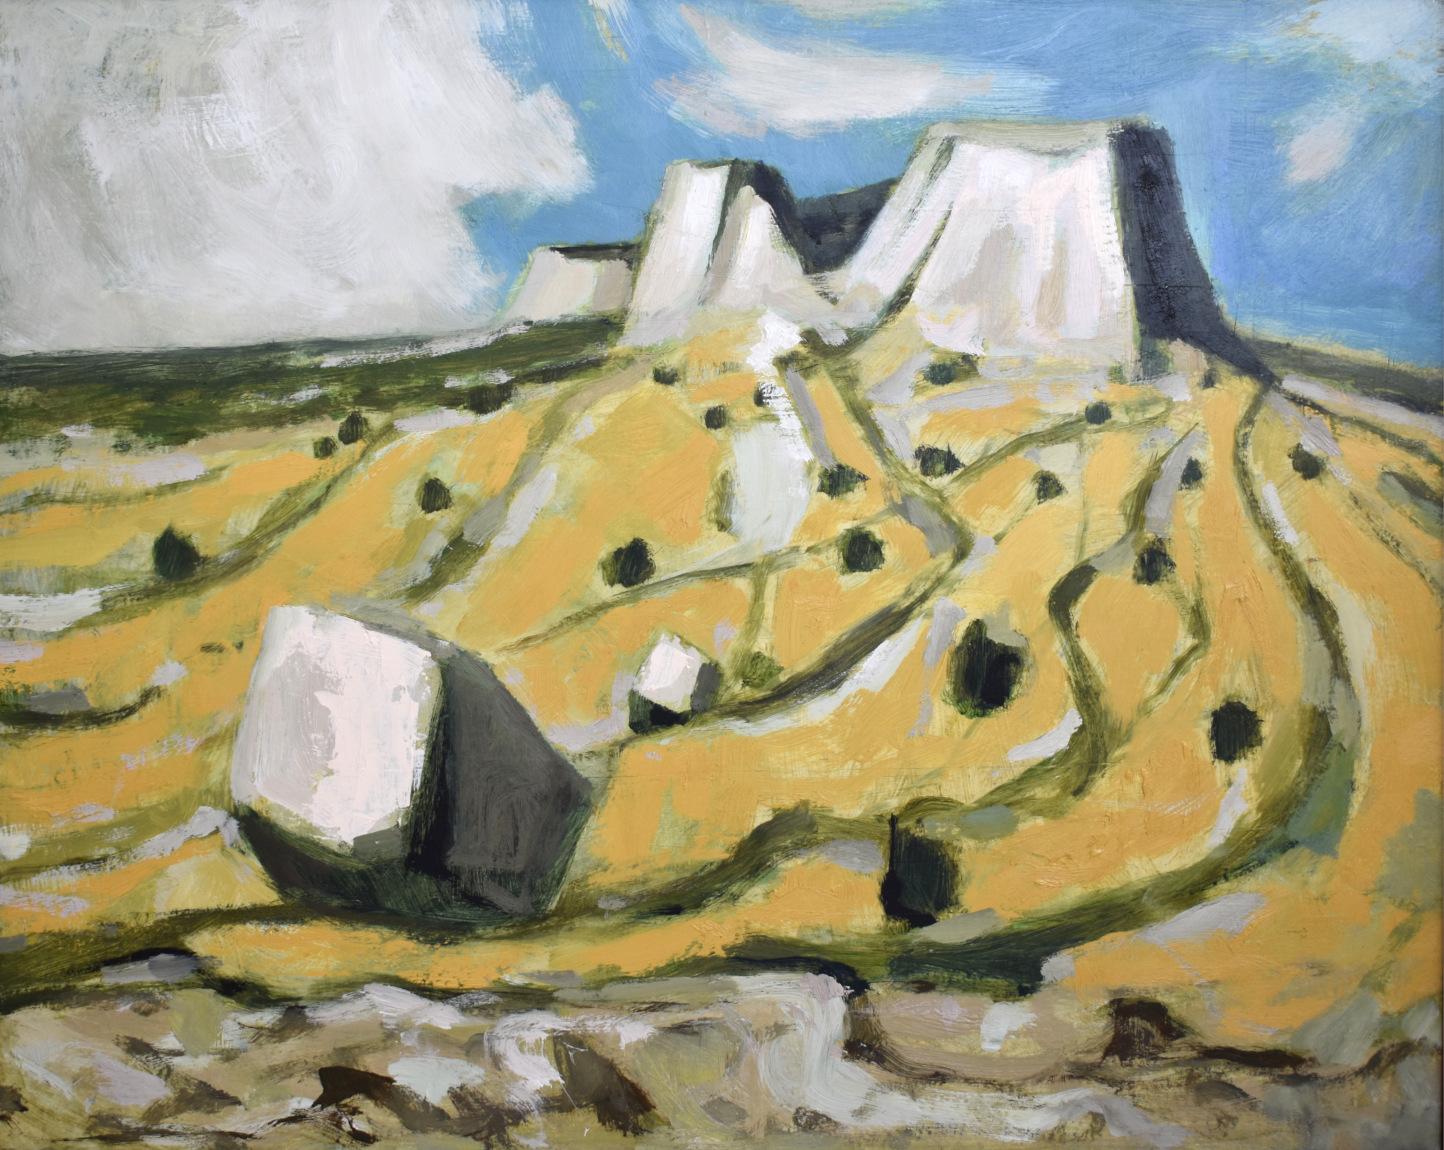 Otis Dozier Landscape Painting - "YELLOW MOUNTAIN COUNTRY" WEST TEXAS